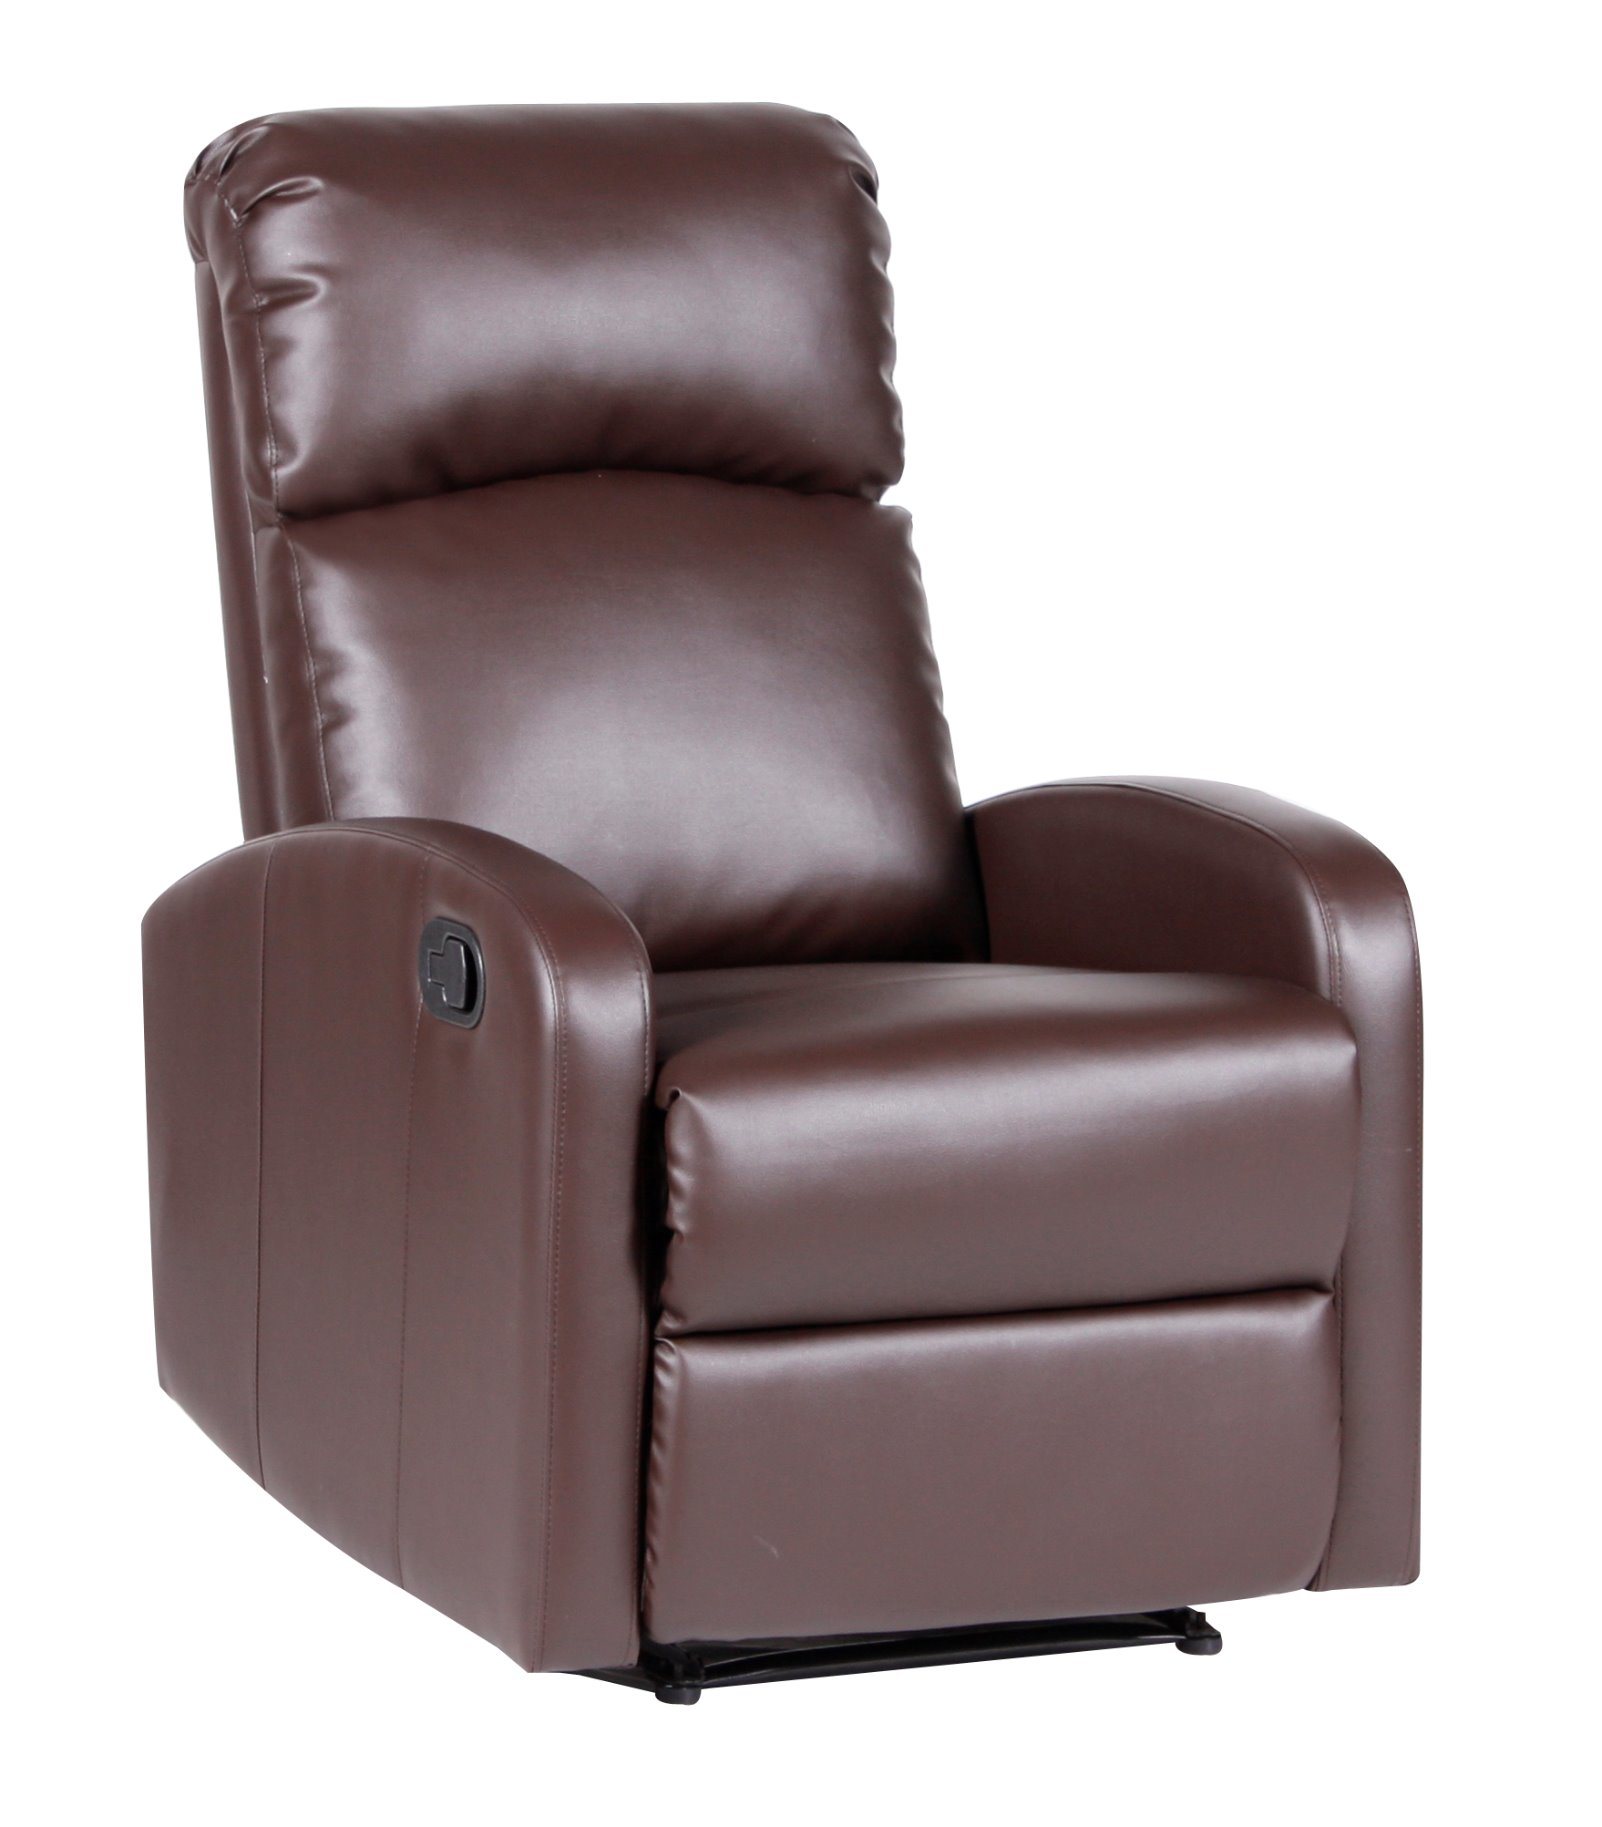 Promotional PU Recliner Chair